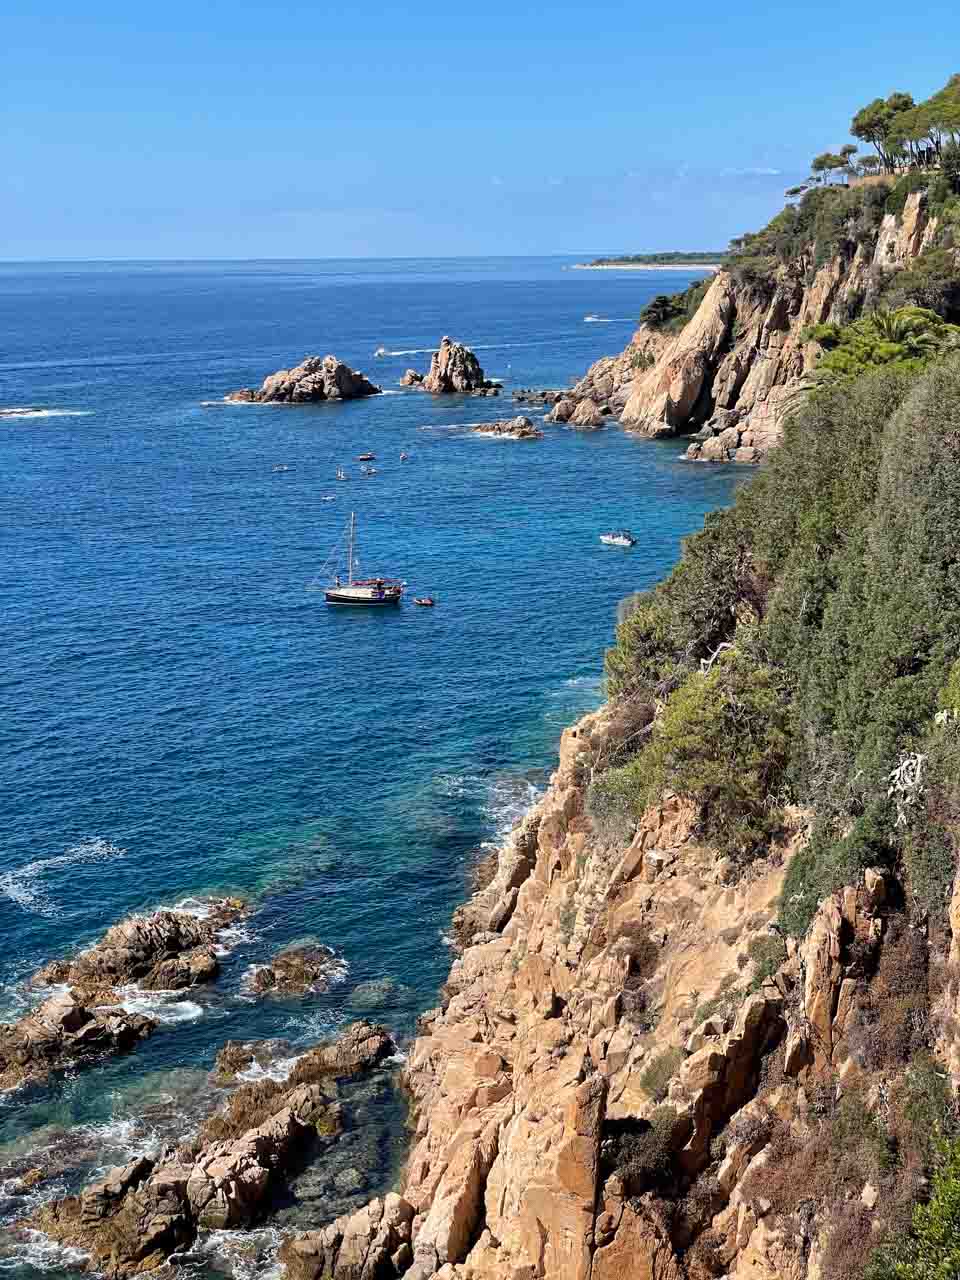 The ruggered coastline of southern Spain on the Mediterranean. Boats are moored near the rocky cliffs.